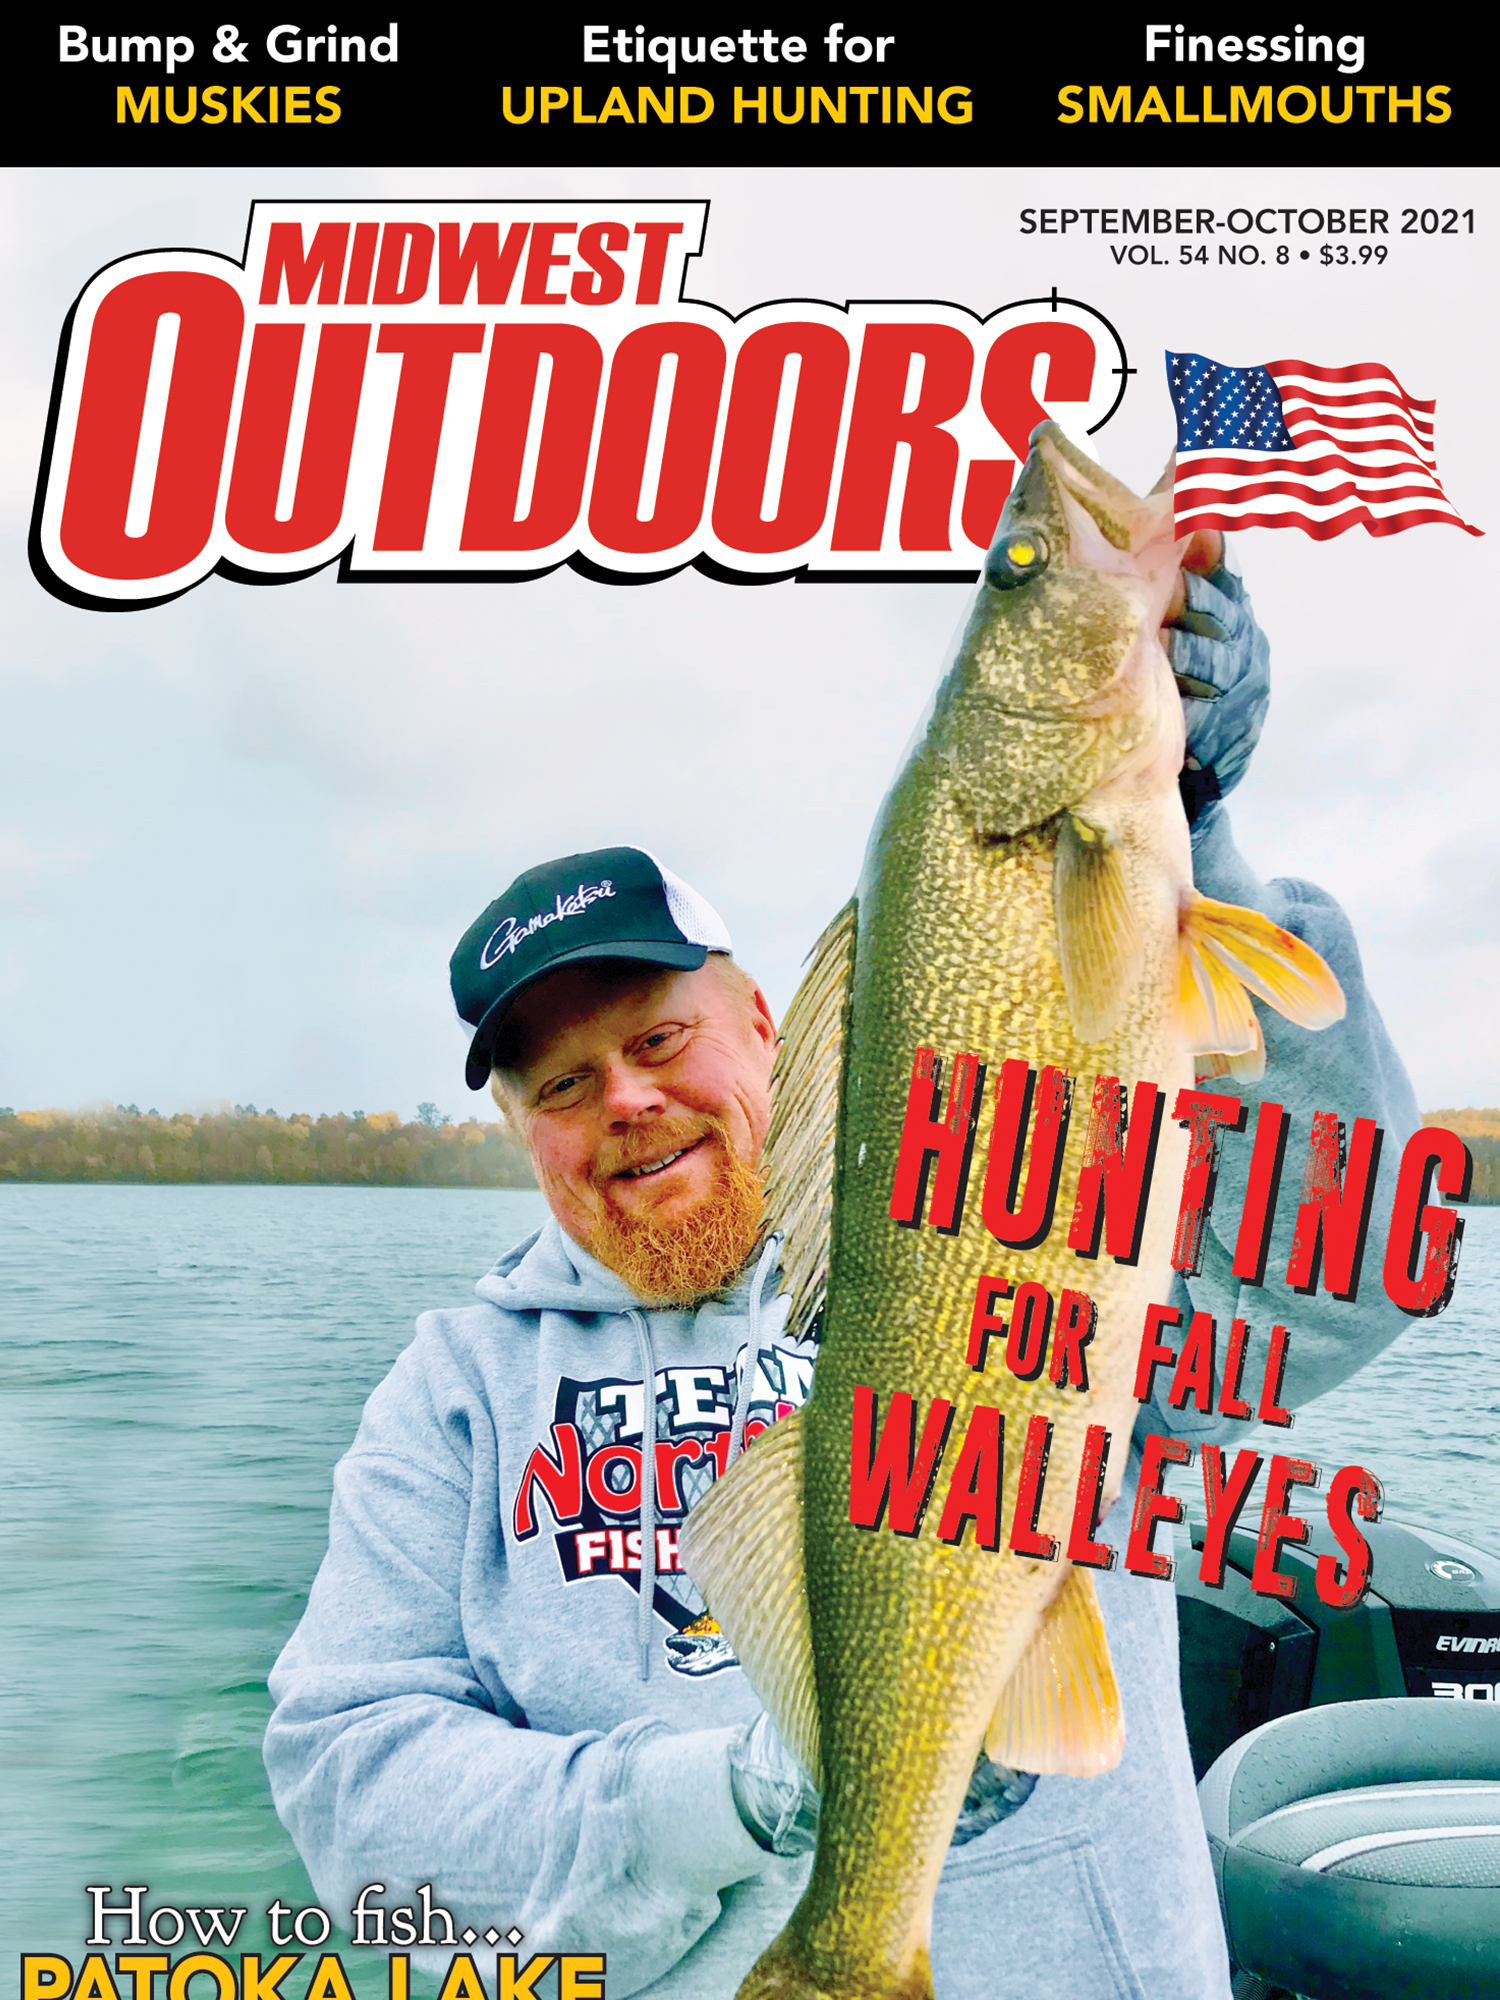 midwest-outdoors-the-1-outdoors-magazine-in-the-midwest-since-1967